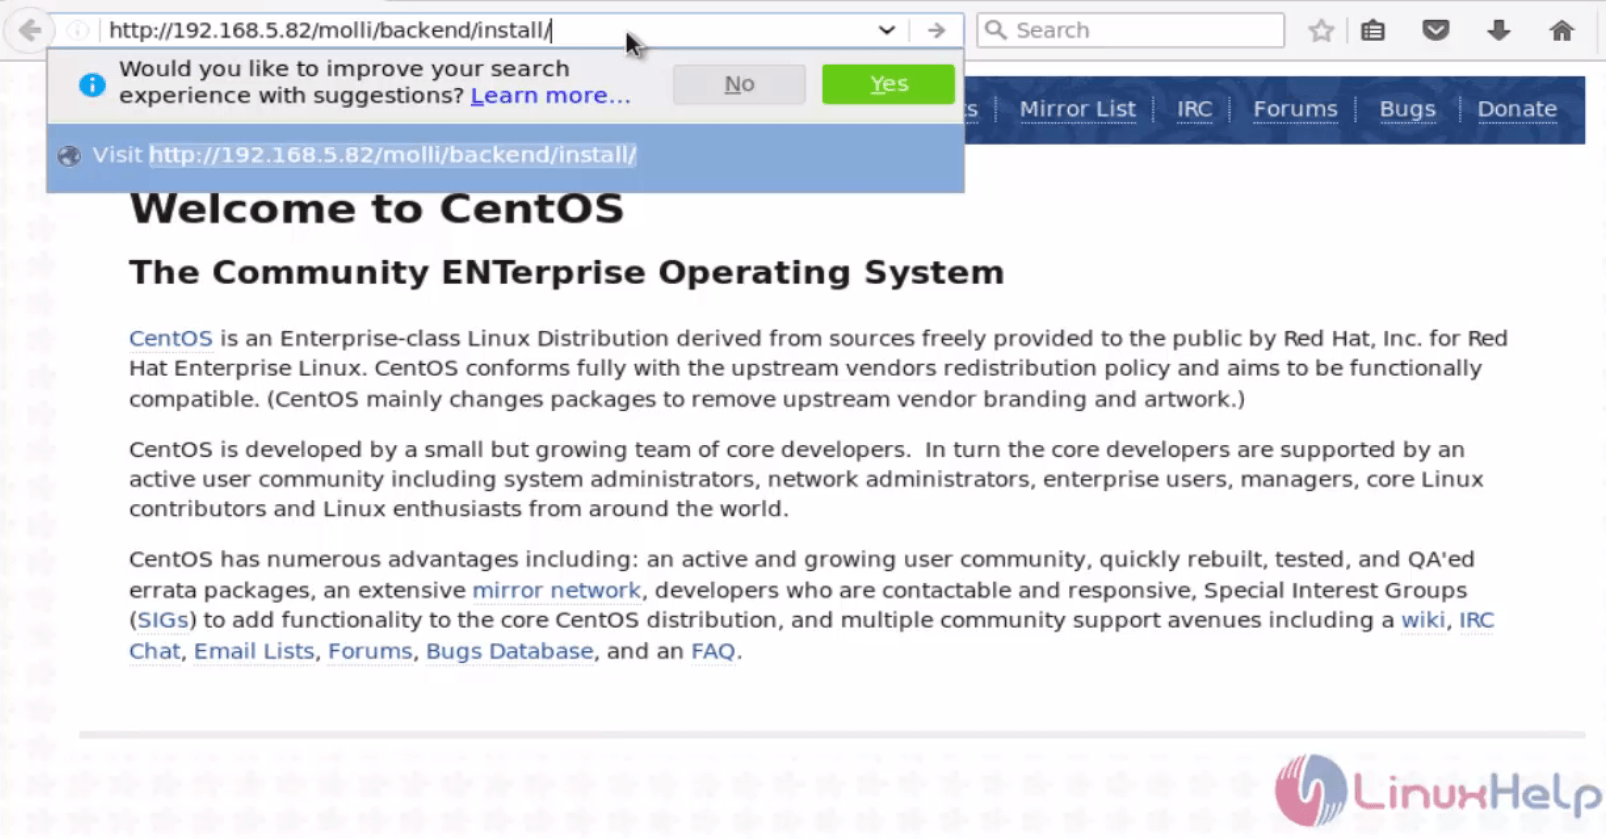 installation-Mollify-web-file-manager-publishing-and-managing-files-hosted-services-in-web-server-Centos6.7-Open-web-browser